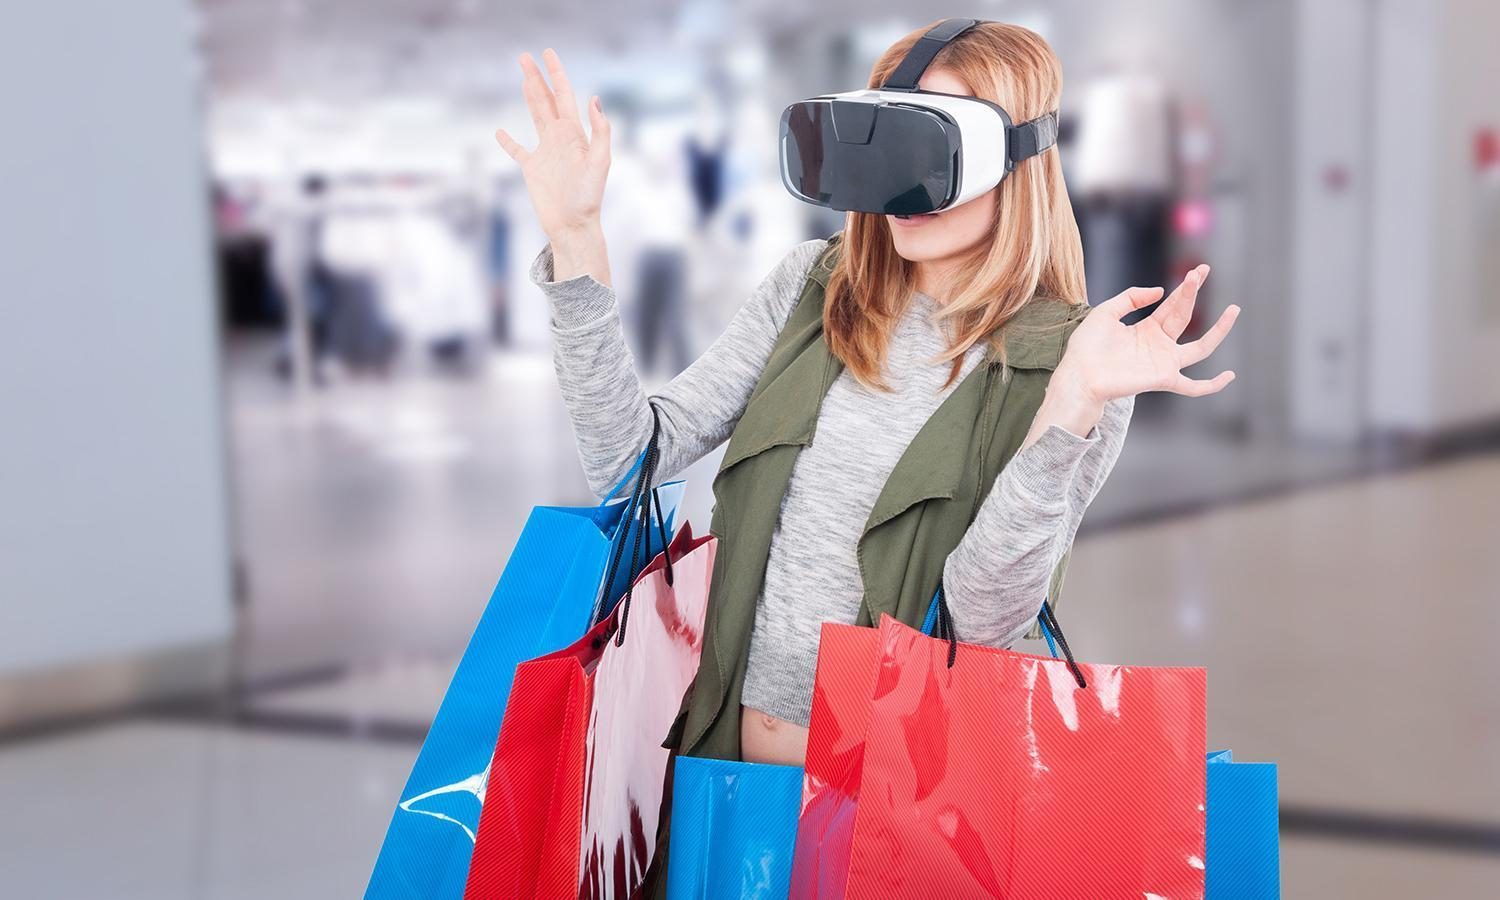 virtual-reality-shaping-the-future-retail-industry-9366020